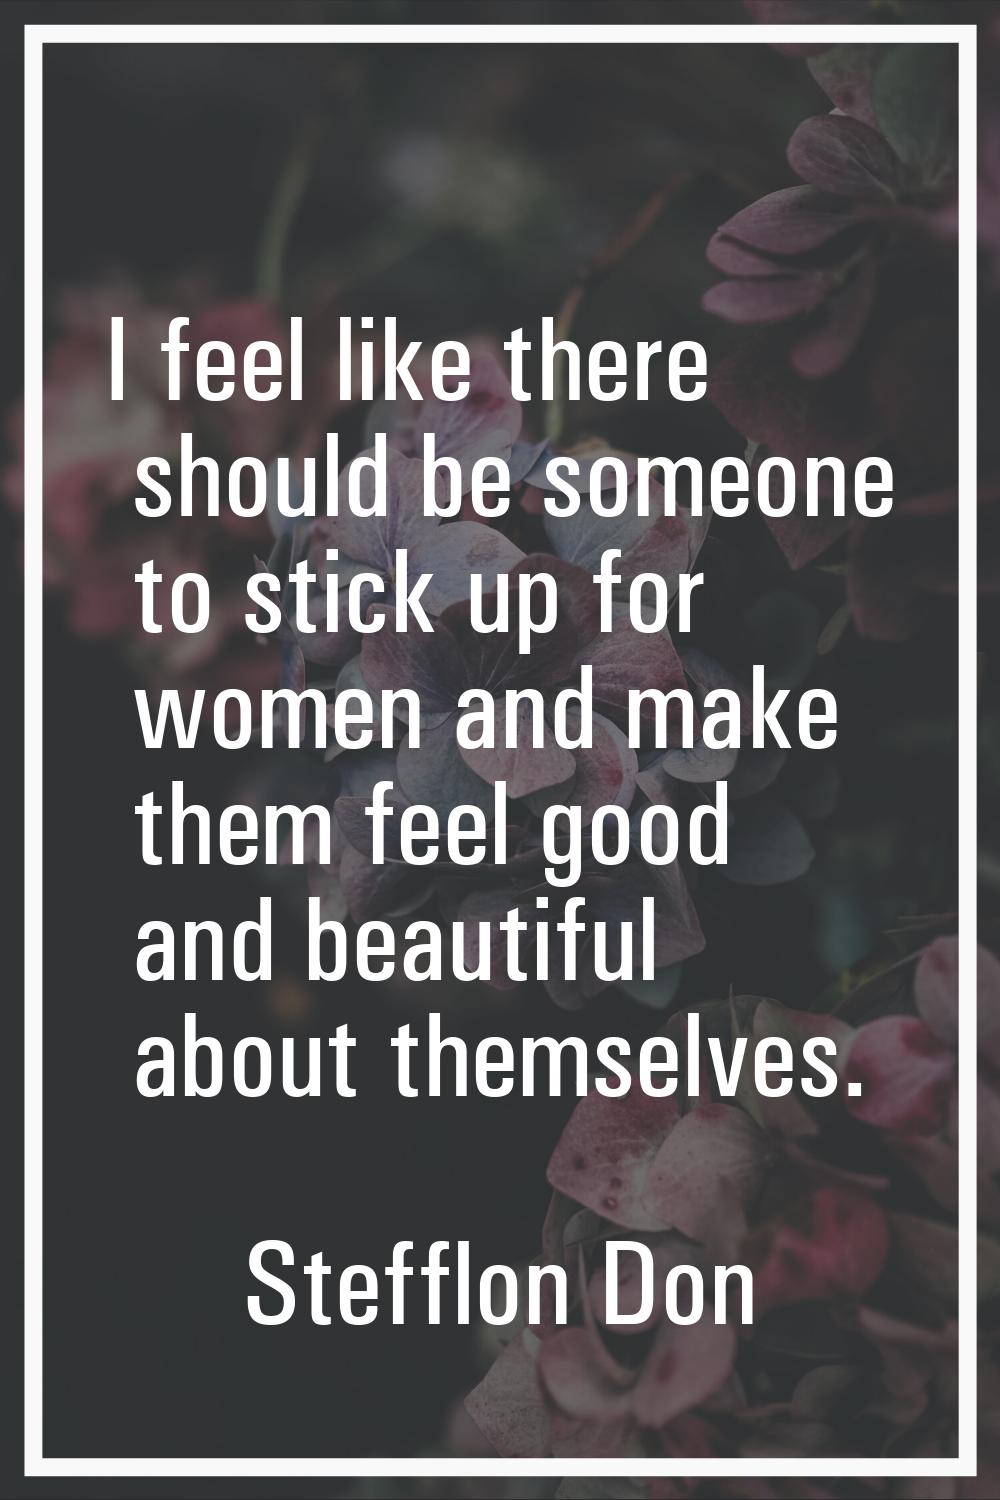 I feel like there should be someone to stick up for women and make them feel good and beautiful abo